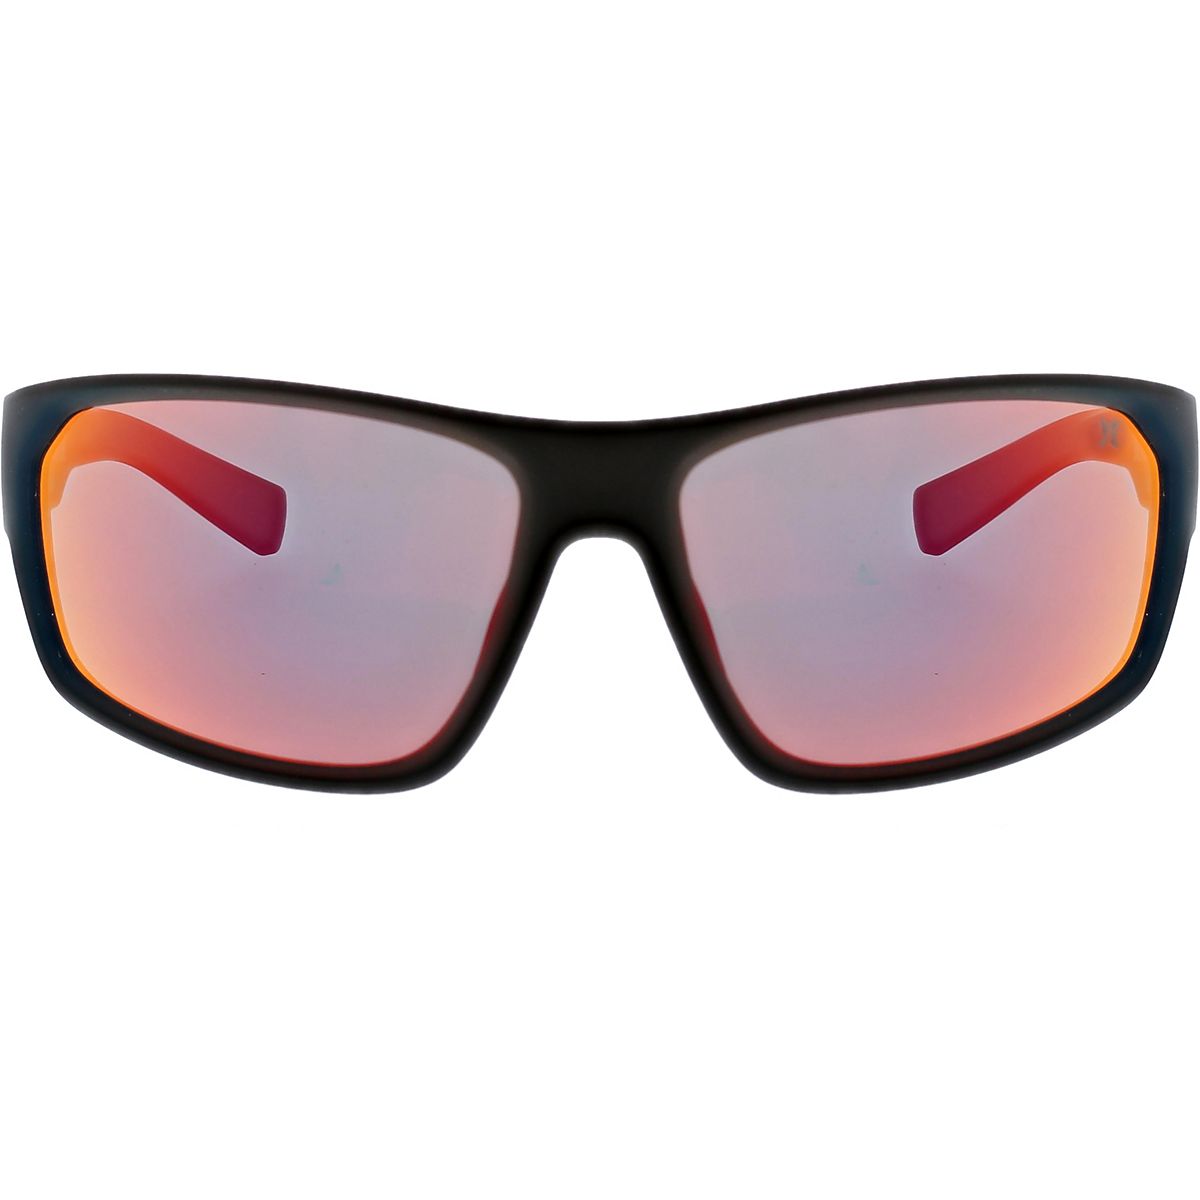 Hurley Closeout Sunglasses | Free Shipping at Academy